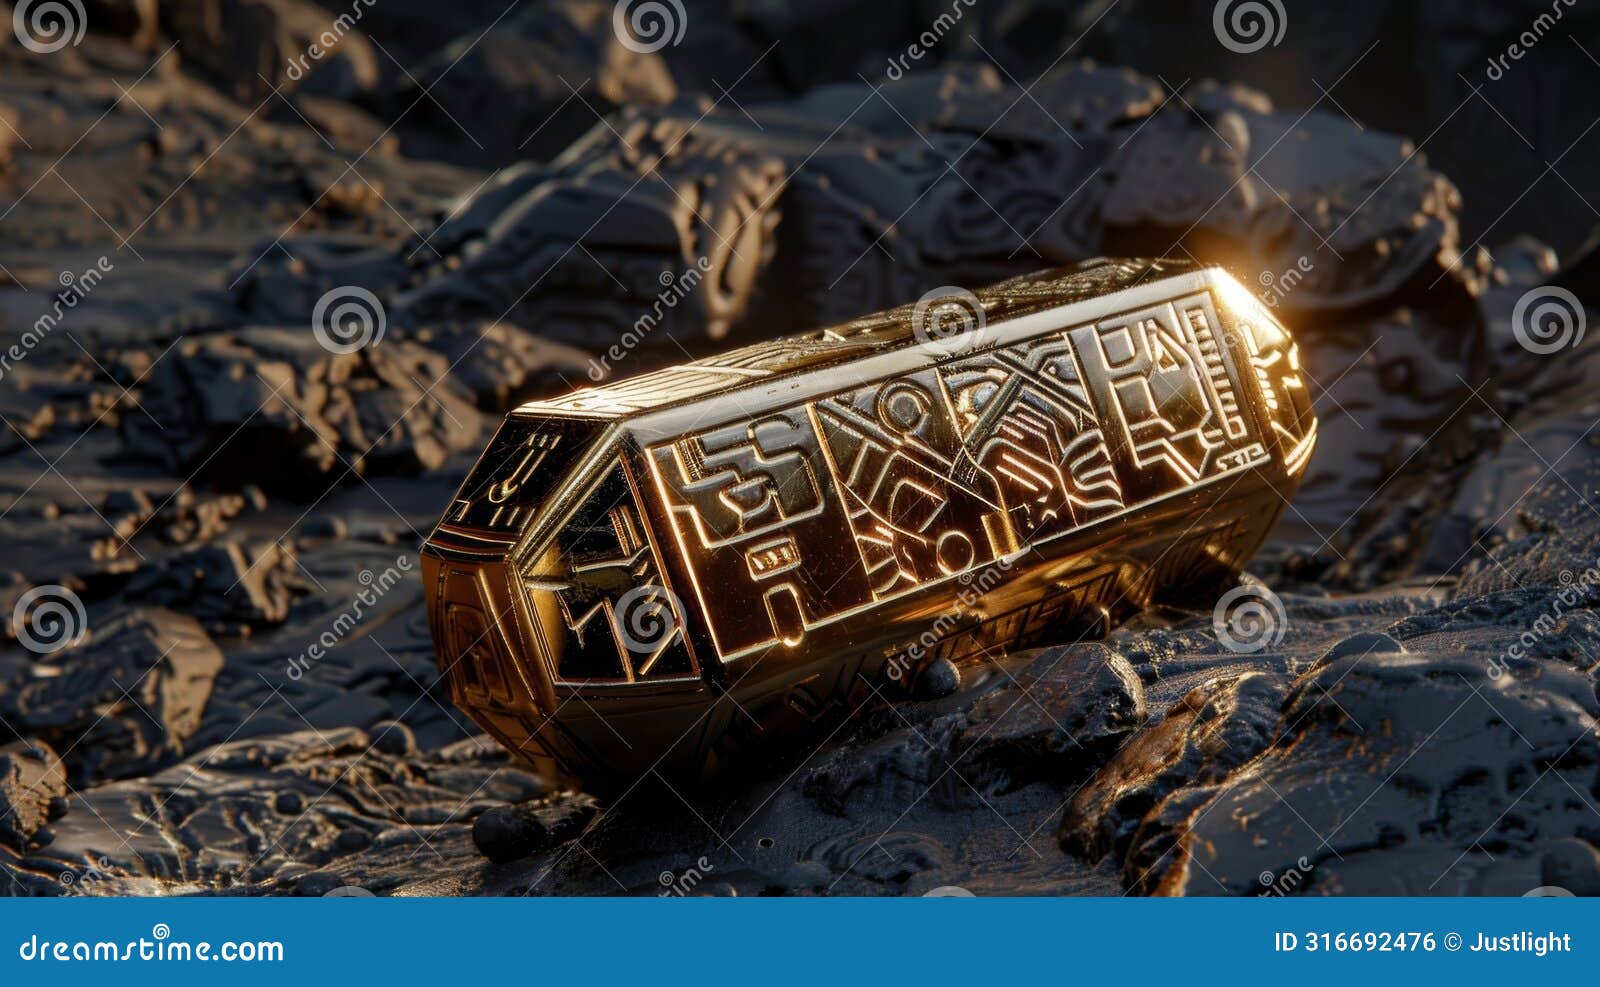 a golden amulet engraved with mysterious glyphs and said to bestow great wisdom and protection upon its wearer. .